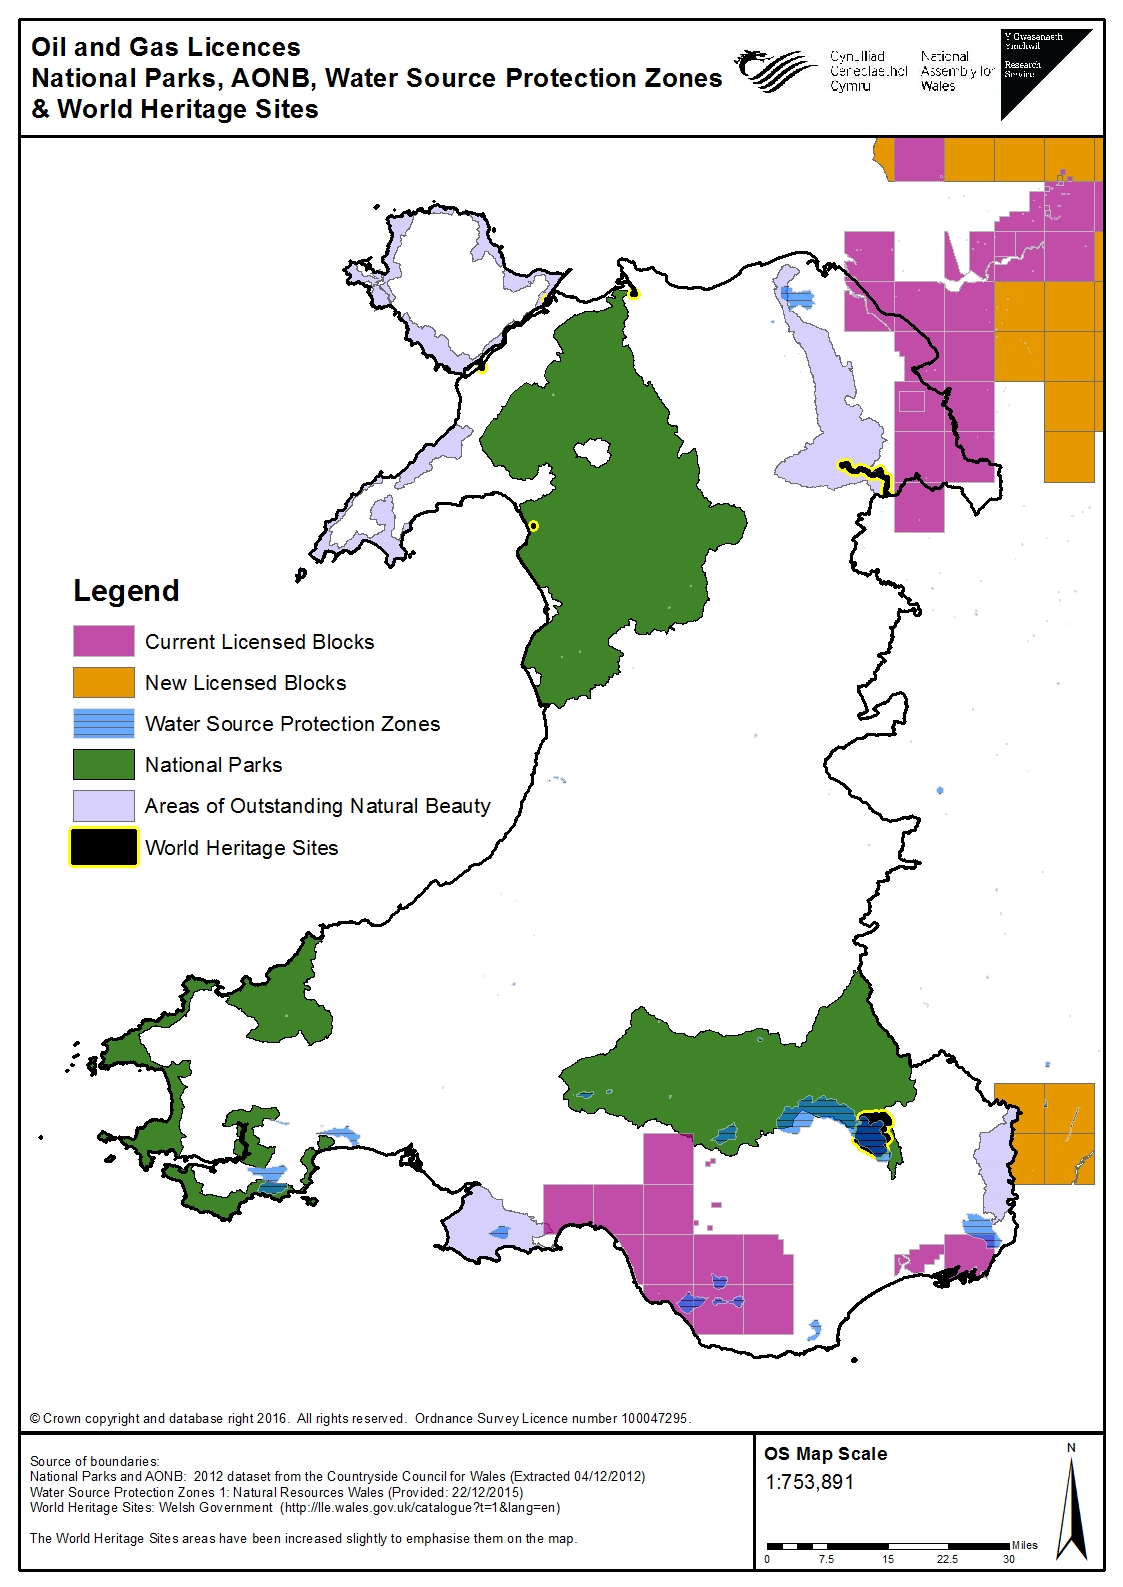 Map of Oil and Gas licensed areas and ‘protected areas’ in Wales